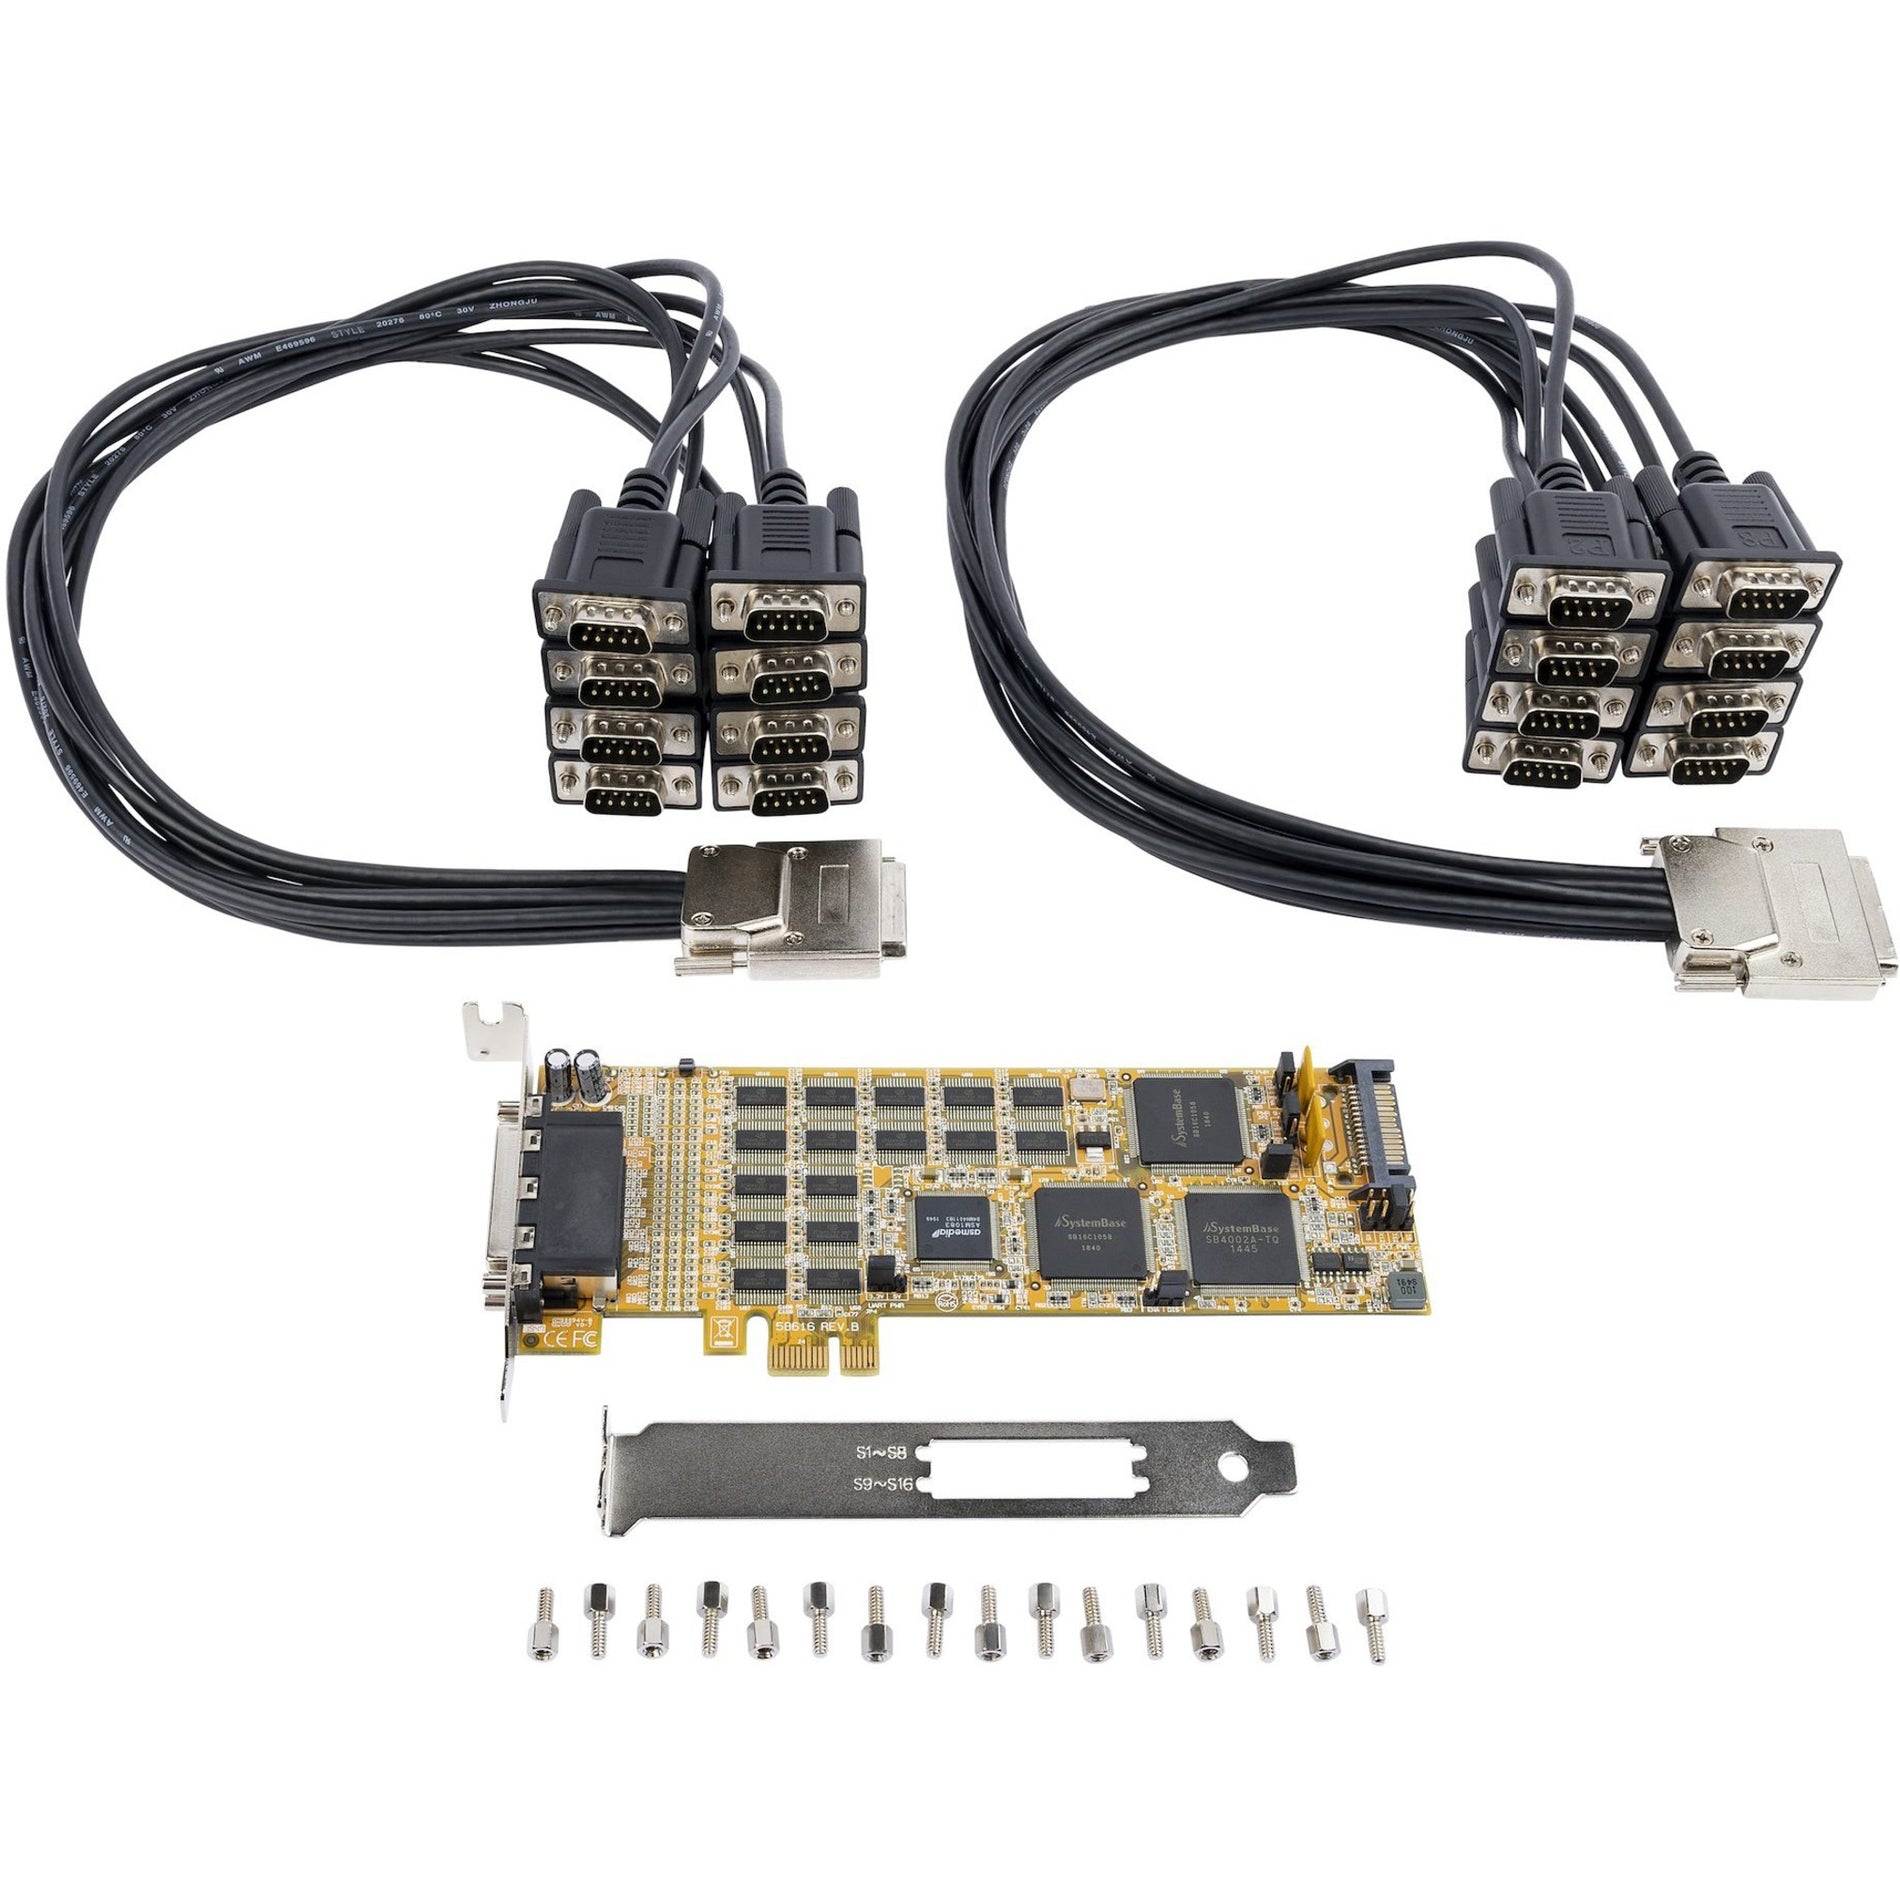 StarTech.com PEX16S550LP 16-Port Low-Profile Serial Card - High-Speed PCIe Serial Card with 16 DB9 RS232 Ports